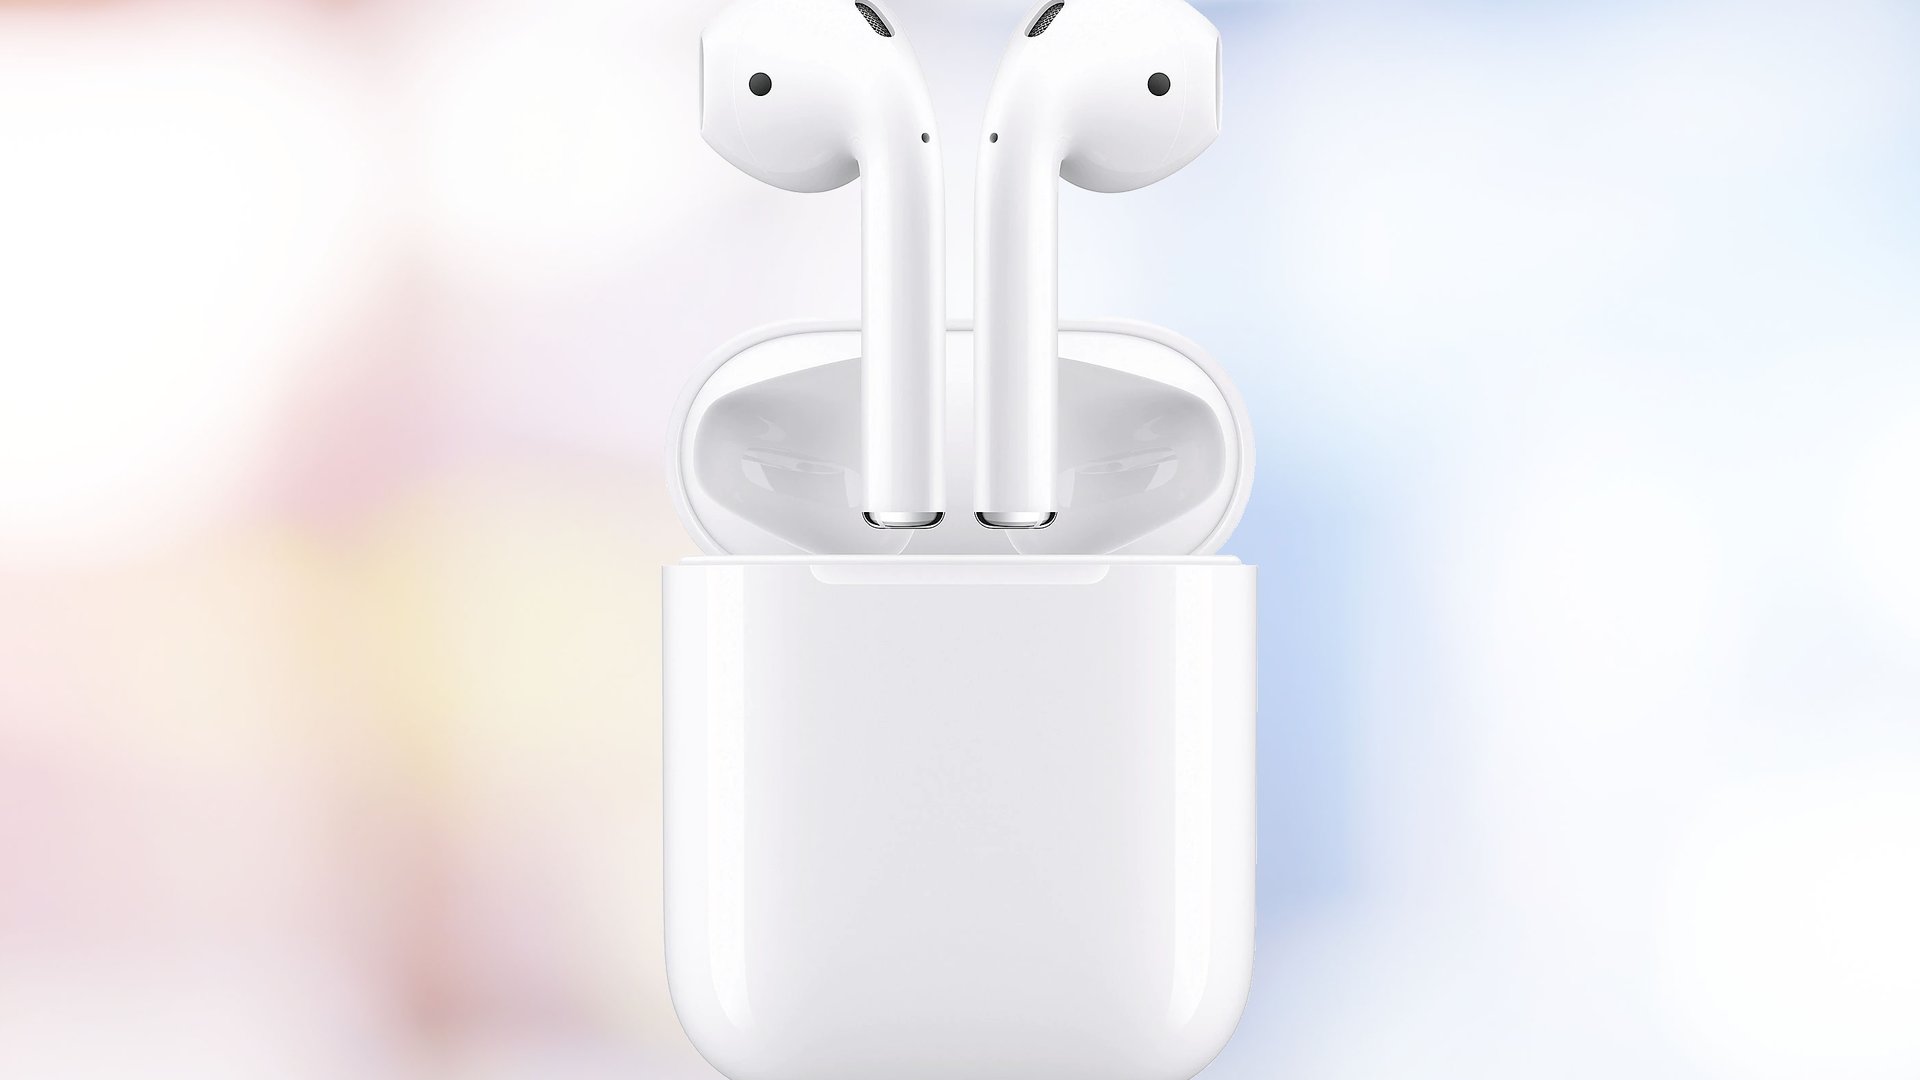 Airpods pro провод. Apple AIRPODS 2. Apple AIRPODS 3rd Generation. Apple Earpods 3. Apple AIRPODS 2.2.